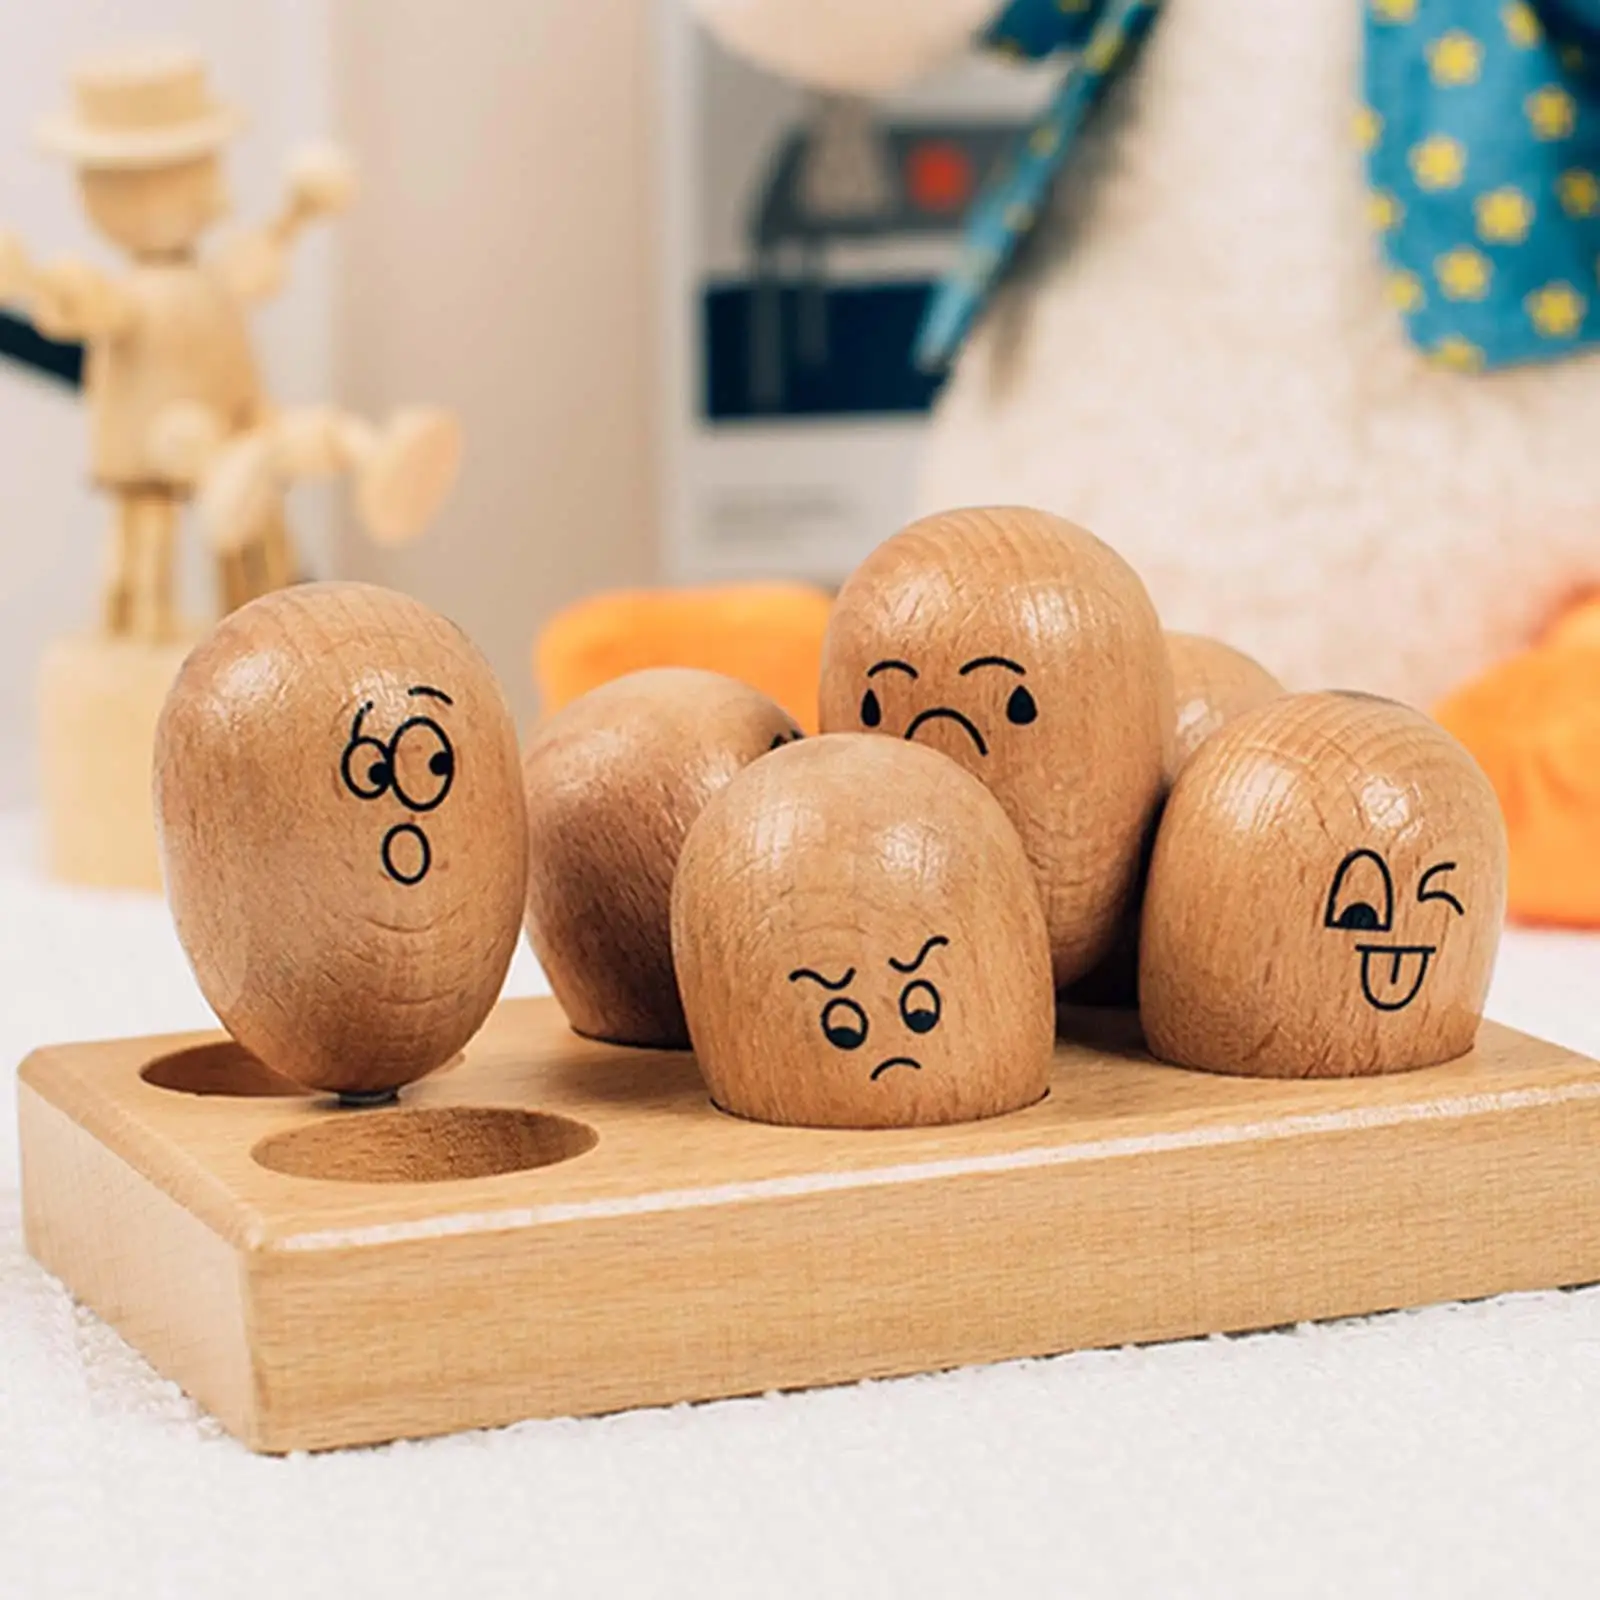 Expression Toys Portable Reducing Stress & Anxiety Egg Shaped 7 Pieces Set Gift Funny Wooden Emotion Toys for Toddlers All Ages